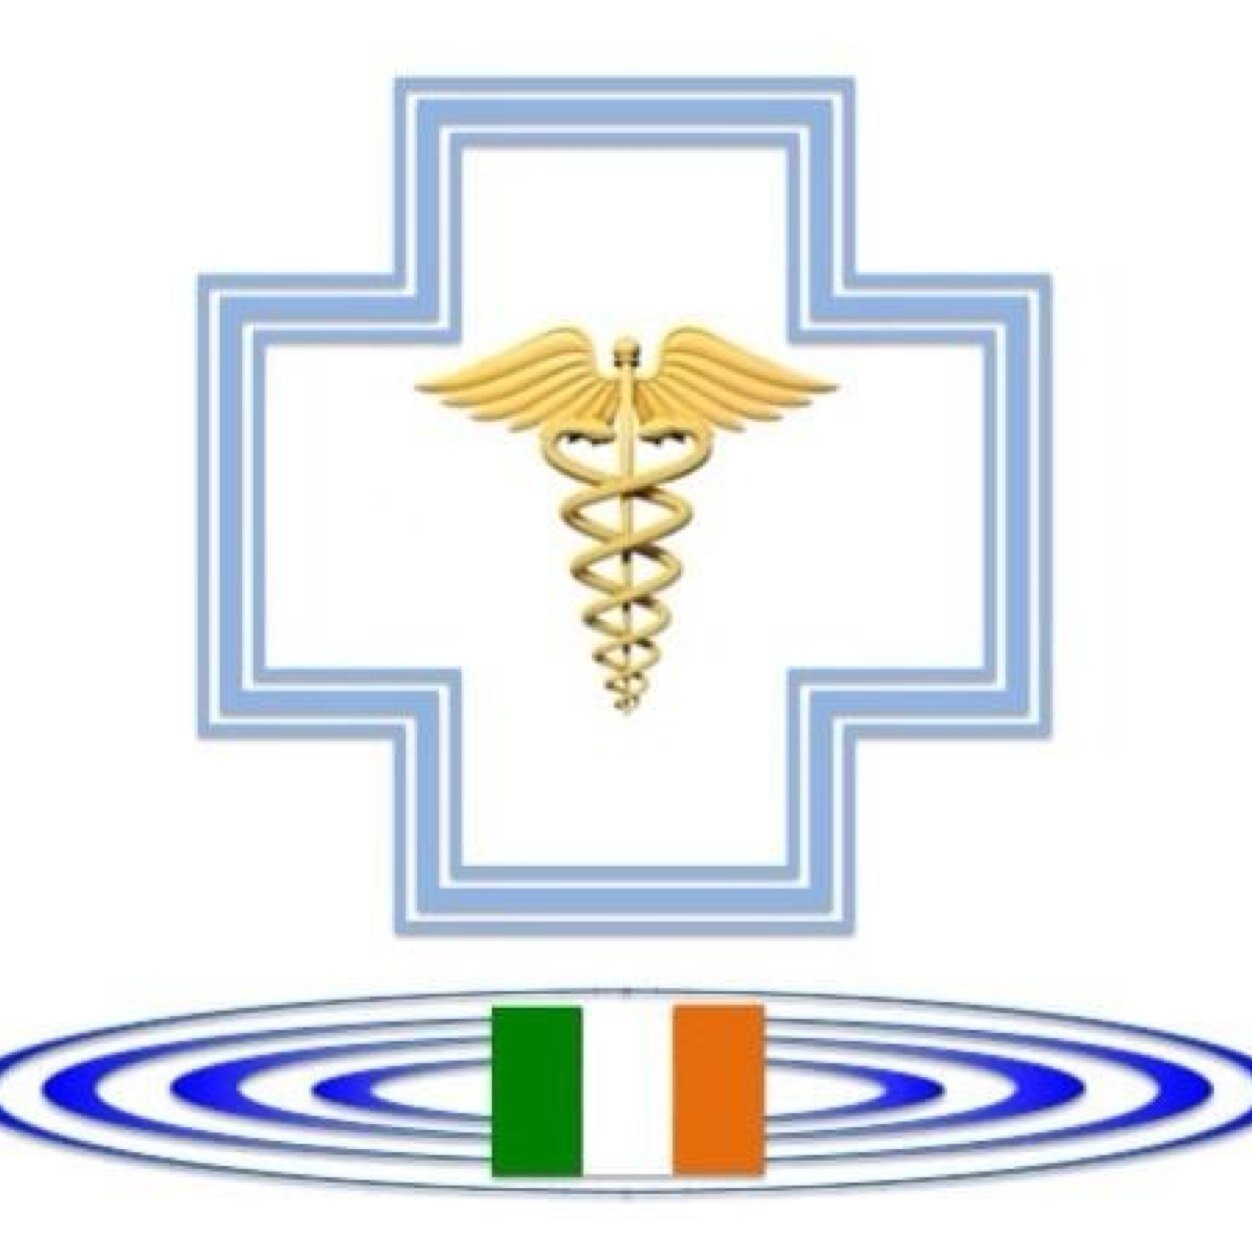 Association of Irish Medical and Nursing Professionals Working in @Lourdes_france. Supporting and safeguarding medical/nursing work for pilgrims.